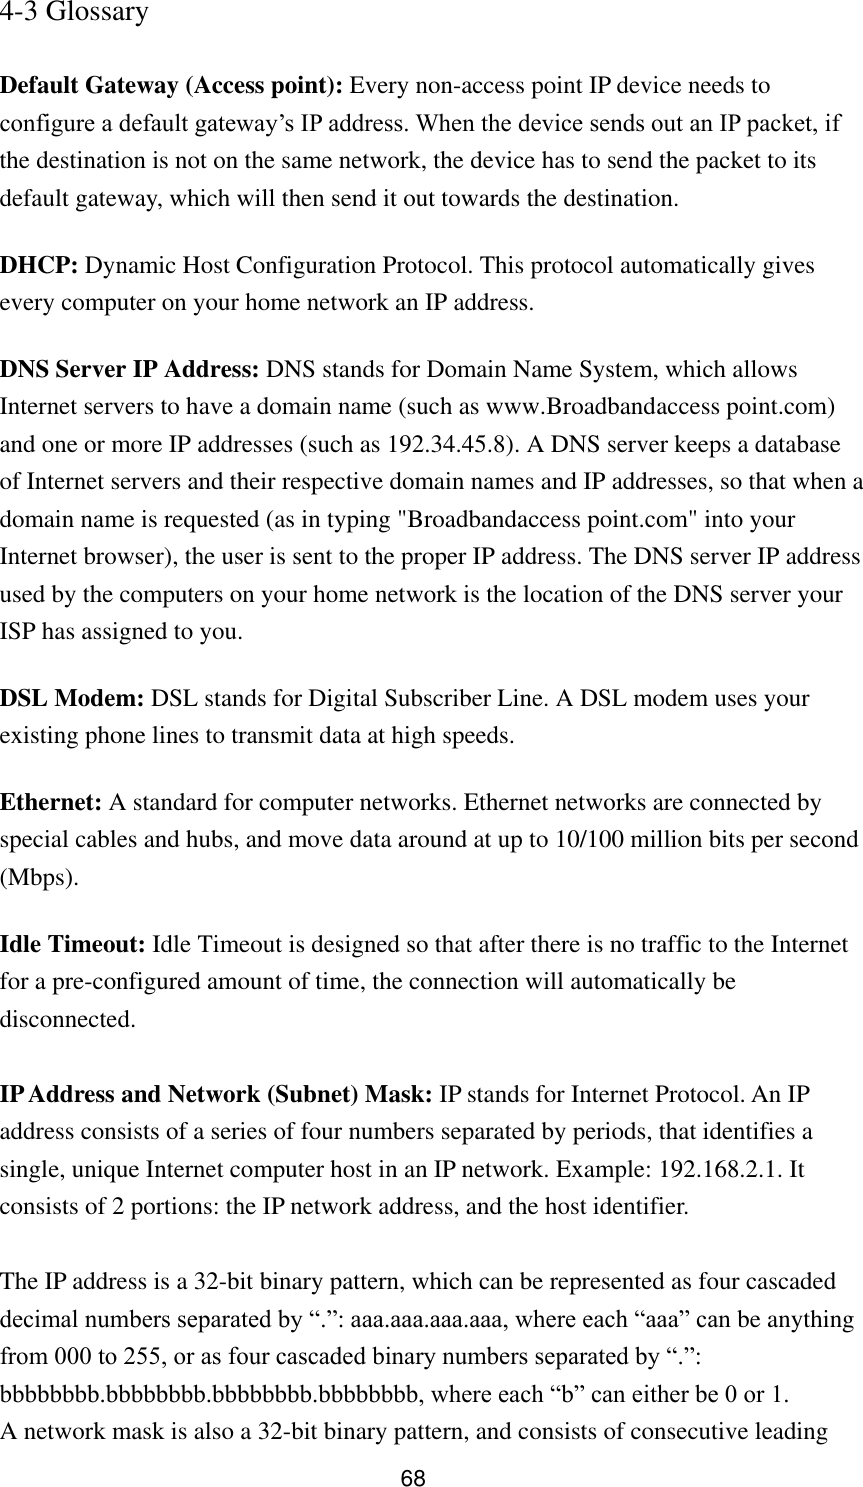 68 4-3 Glossary  Default Gateway (Access point): Every non-access point IP device needs to configure a default gateway‟s IP address. When the device sends out an IP packet, if the destination is not on the same network, the device has to send the packet to its default gateway, which will then send it out towards the destination. DHCP: Dynamic Host Configuration Protocol. This protocol automatically gives every computer on your home network an IP address. DNS Server IP Address: DNS stands for Domain Name System, which allows Internet servers to have a domain name (such as www.Broadbandaccess point.com) and one or more IP addresses (such as 192.34.45.8). A DNS server keeps a database of Internet servers and their respective domain names and IP addresses, so that when a domain name is requested (as in typing &quot;Broadbandaccess point.com&quot; into your Internet browser), the user is sent to the proper IP address. The DNS server IP address used by the computers on your home network is the location of the DNS server your ISP has assigned to you.   DSL Modem: DSL stands for Digital Subscriber Line. A DSL modem uses your existing phone lines to transmit data at high speeds.   Ethernet: A standard for computer networks. Ethernet networks are connected by special cables and hubs, and move data around at up to 10/100 million bits per second (Mbps).   Idle Timeout: Idle Timeout is designed so that after there is no traffic to the Internet for a pre-configured amount of time, the connection will automatically be disconnected.  IP Address and Network (Subnet) Mask: IP stands for Internet Protocol. An IP address consists of a series of four numbers separated by periods, that identifies a single, unique Internet computer host in an IP network. Example: 192.168.2.1. It consists of 2 portions: the IP network address, and the host identifier.  The IP address is a 32-bit binary pattern, which can be represented as four cascaded decimal numbers separated by “.”: aaa.aaa.aaa.aaa, where each “aaa” can be anything from 000 to 255, or as four cascaded binary numbers separated by “.”: bbbbbbbb.bbbbbbbb.bbbbbbbb.bbbbbbbb, where each “b” can either be 0 or 1. A network mask is also a 32-bit binary pattern, and consists of consecutive leading 